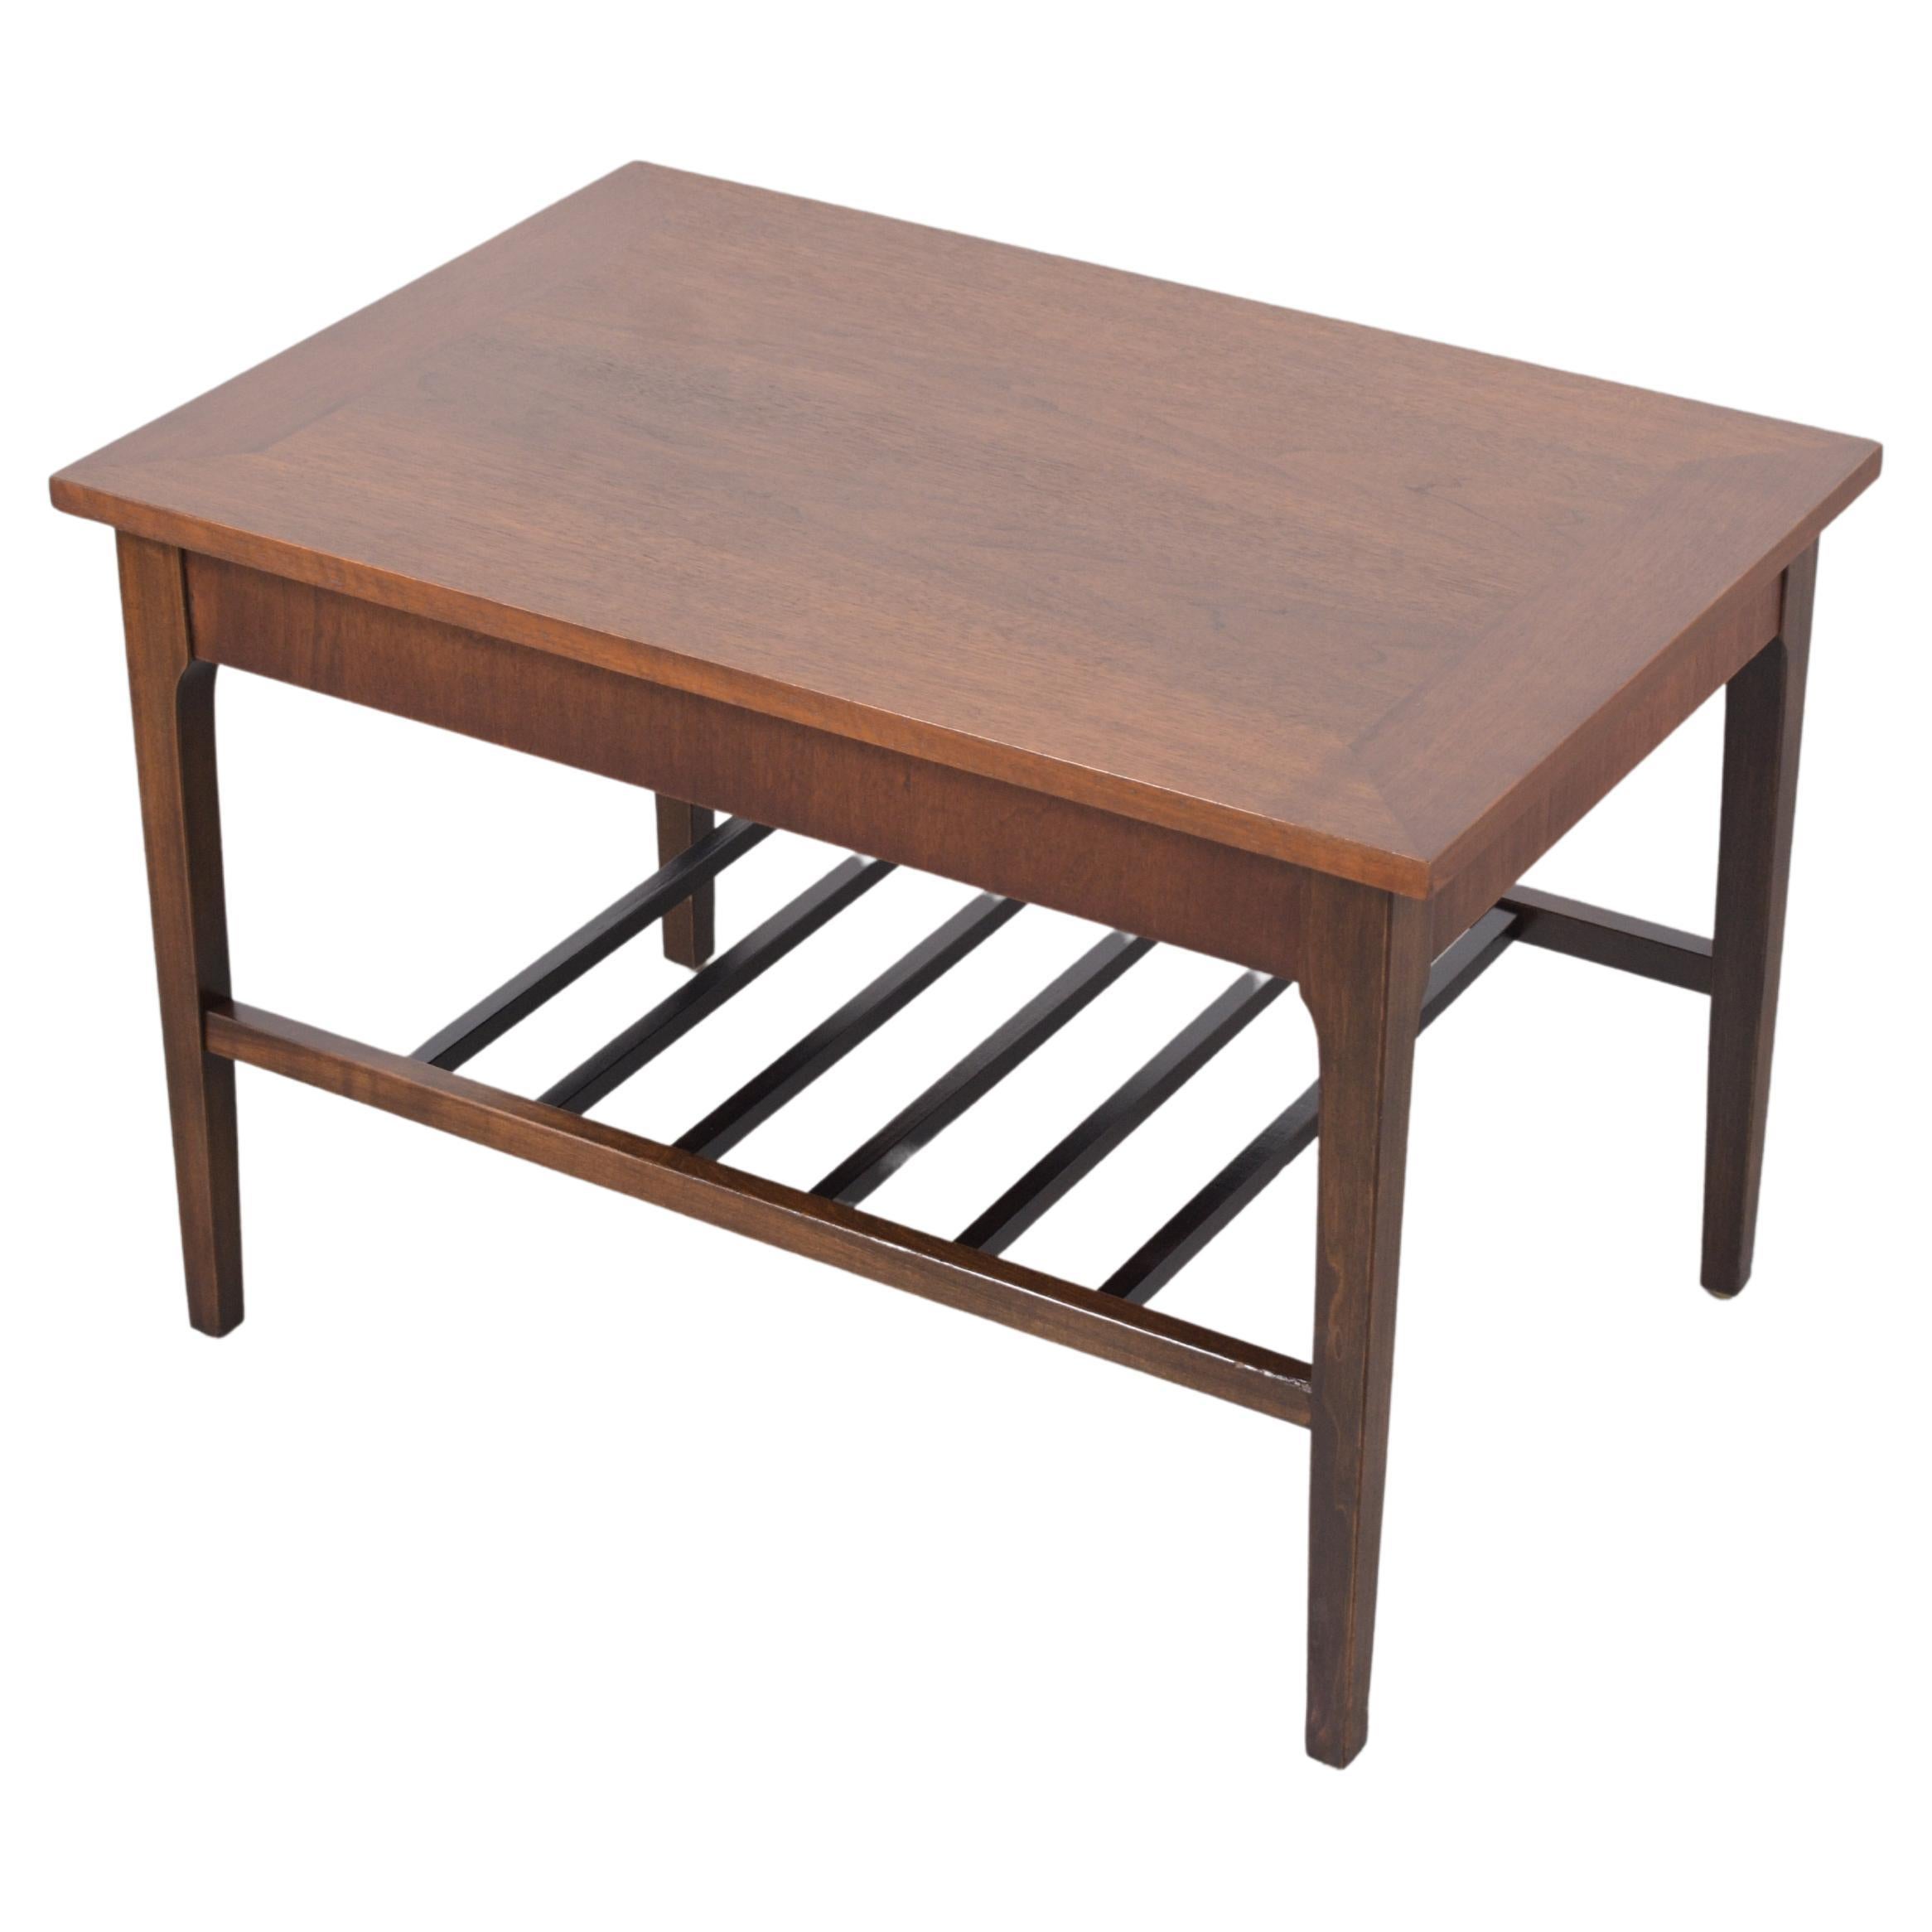 Discover our extraordinary 1960s mid-century modern side table, beautifully hand-crafted from quality walnut wood and meticulously restored by our expert craftsmen. This exceptional accent piece features a rich blend of walnut and ebonized color